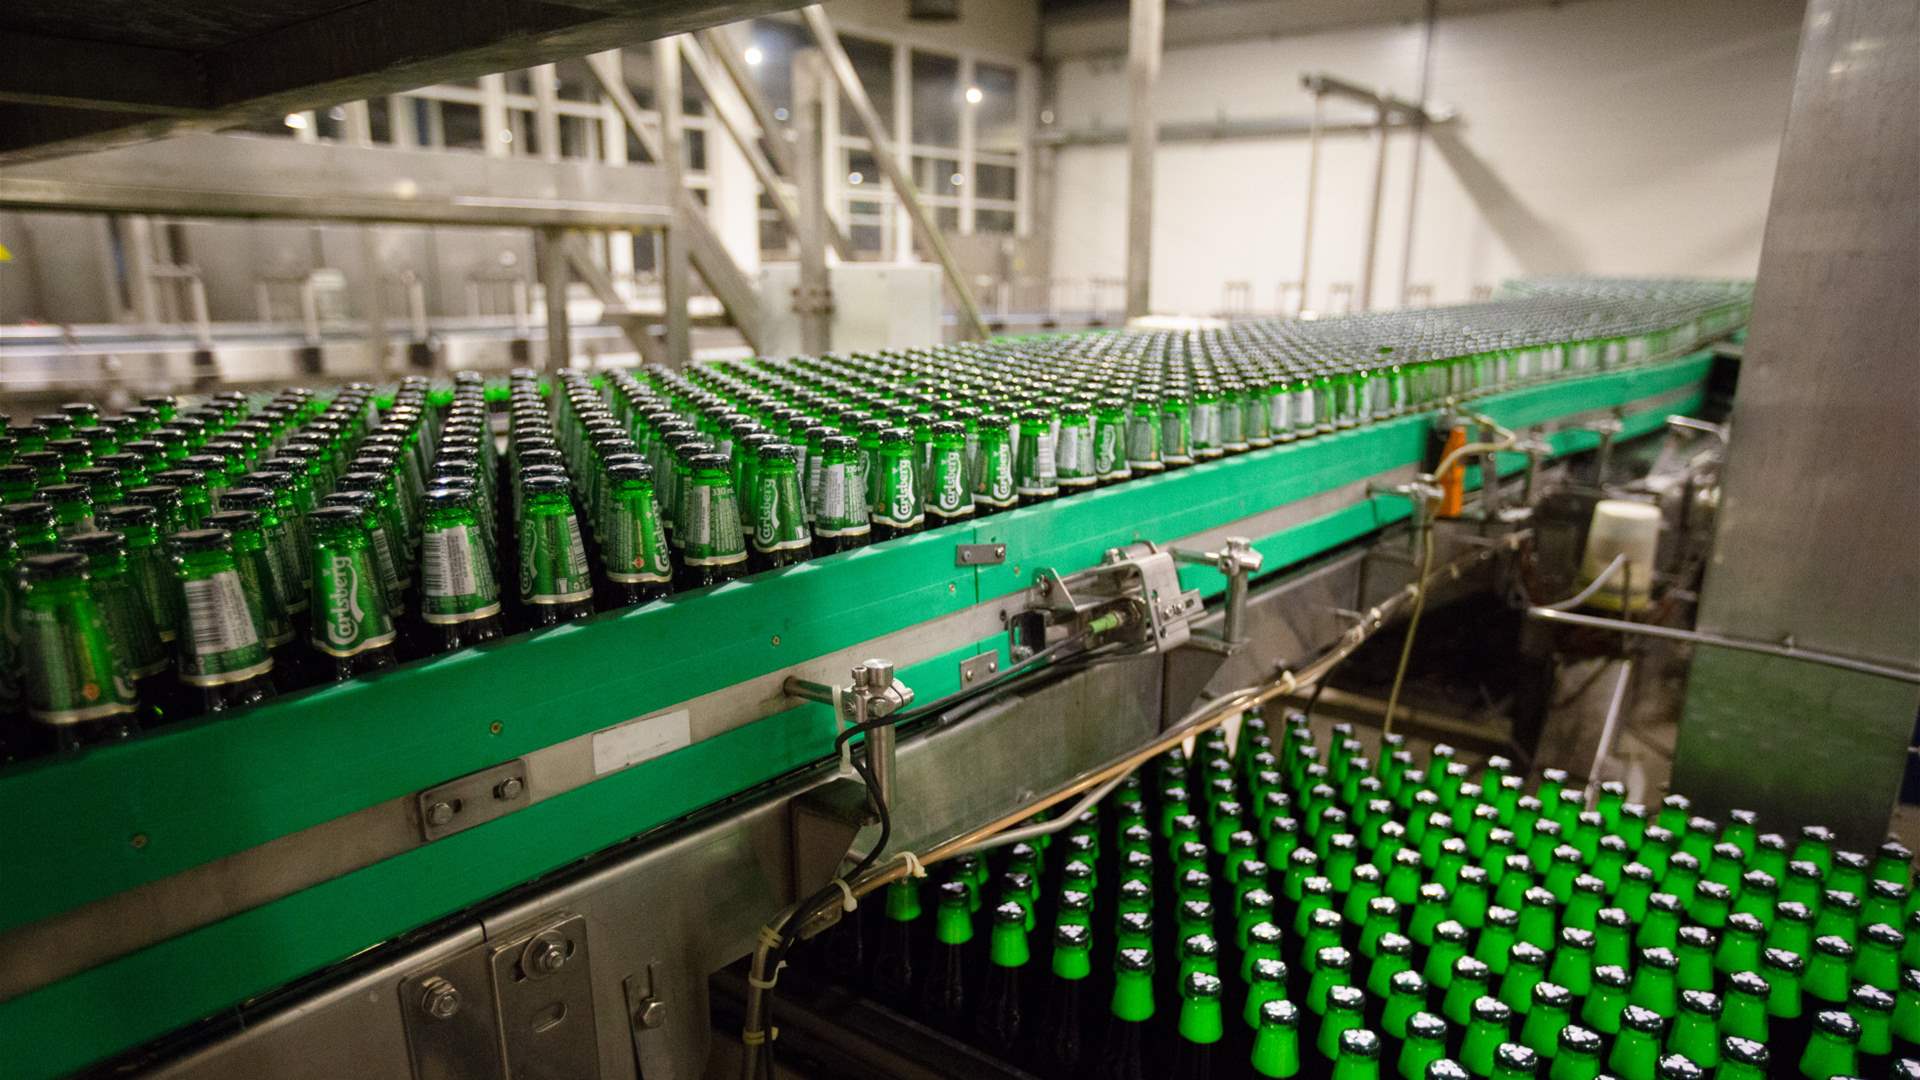 Russia lands shares for Danone and Carlsberg